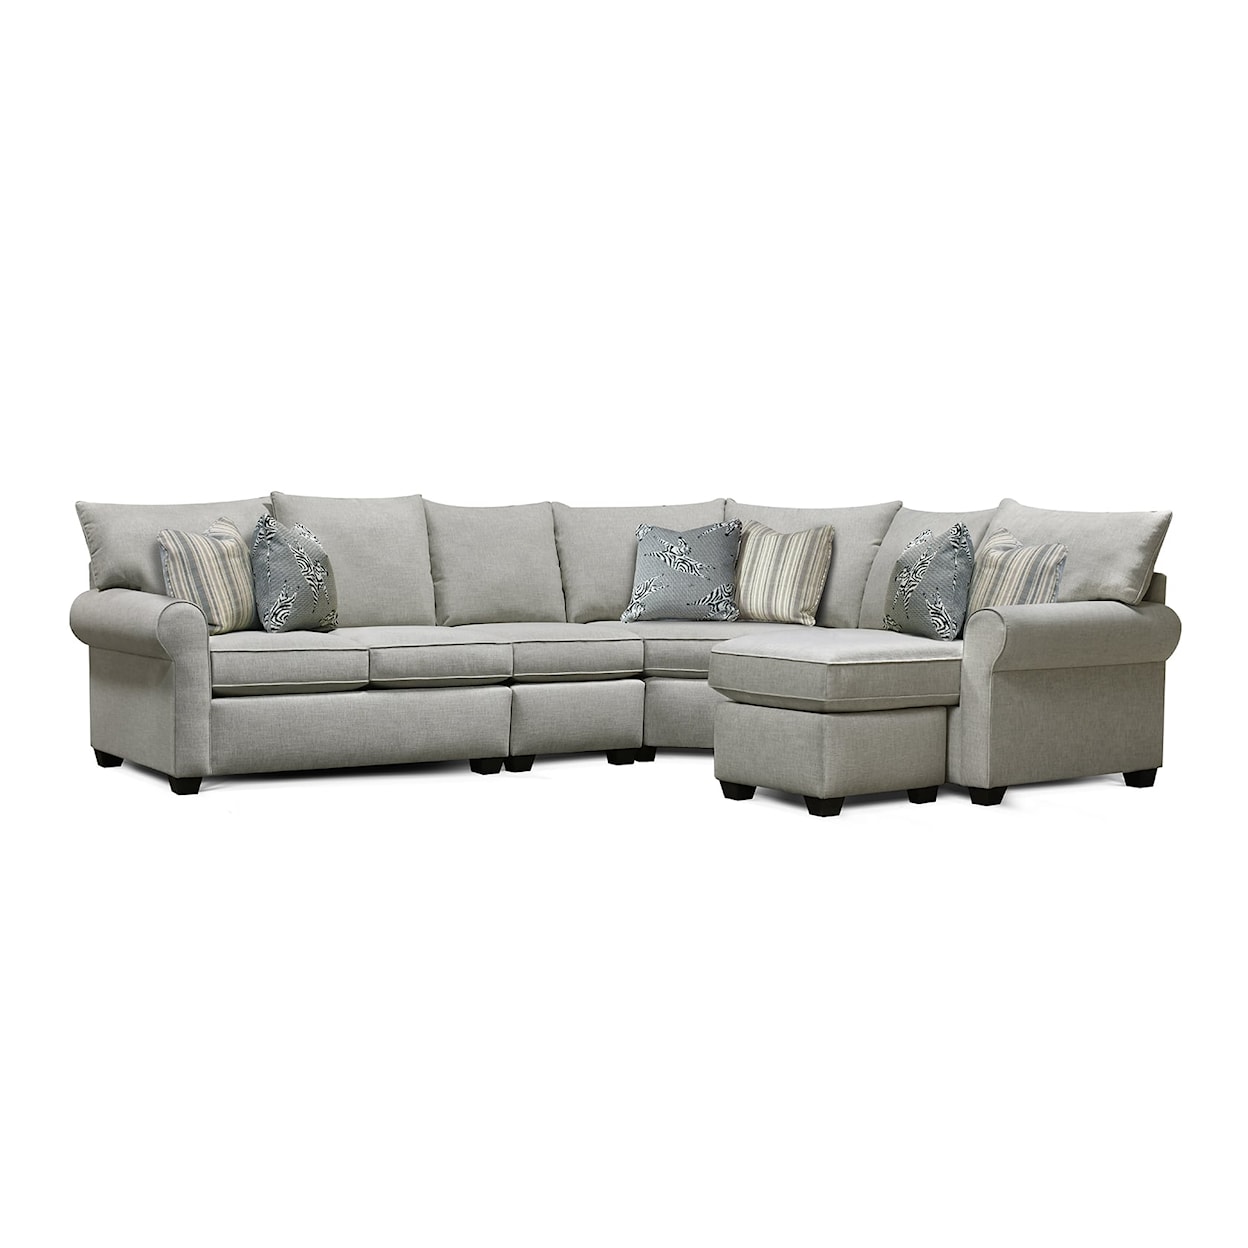 England 4450 Series 5-Piece Sectional